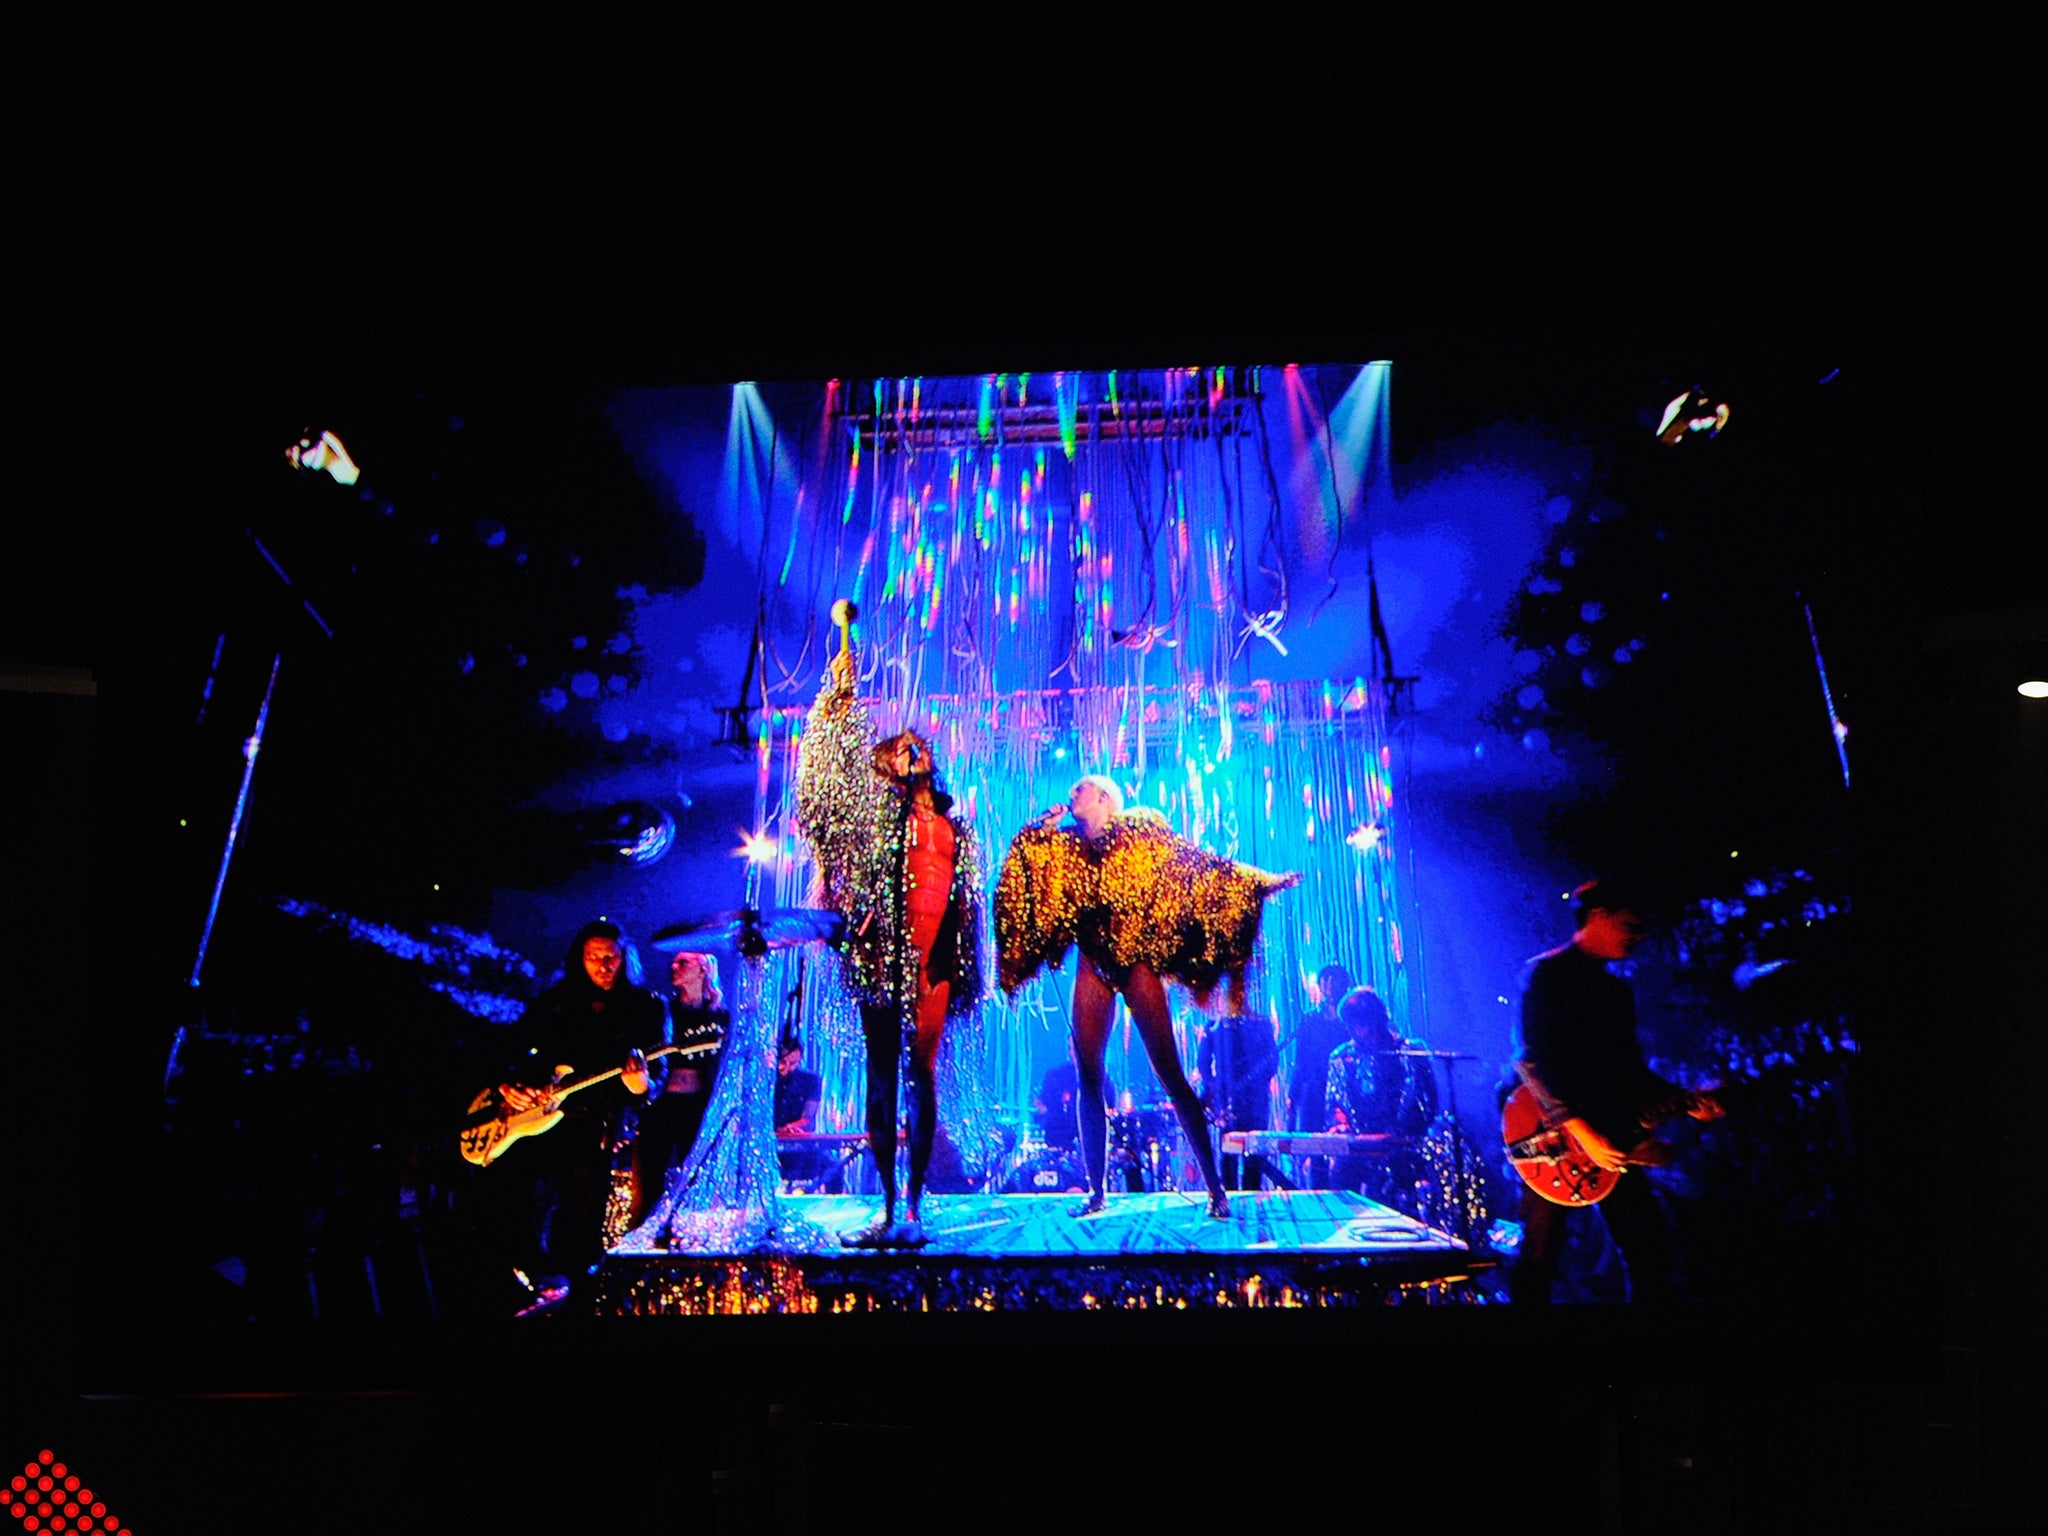 Wayne Coyne of The Flaming Lips performs with Miley Cyrus